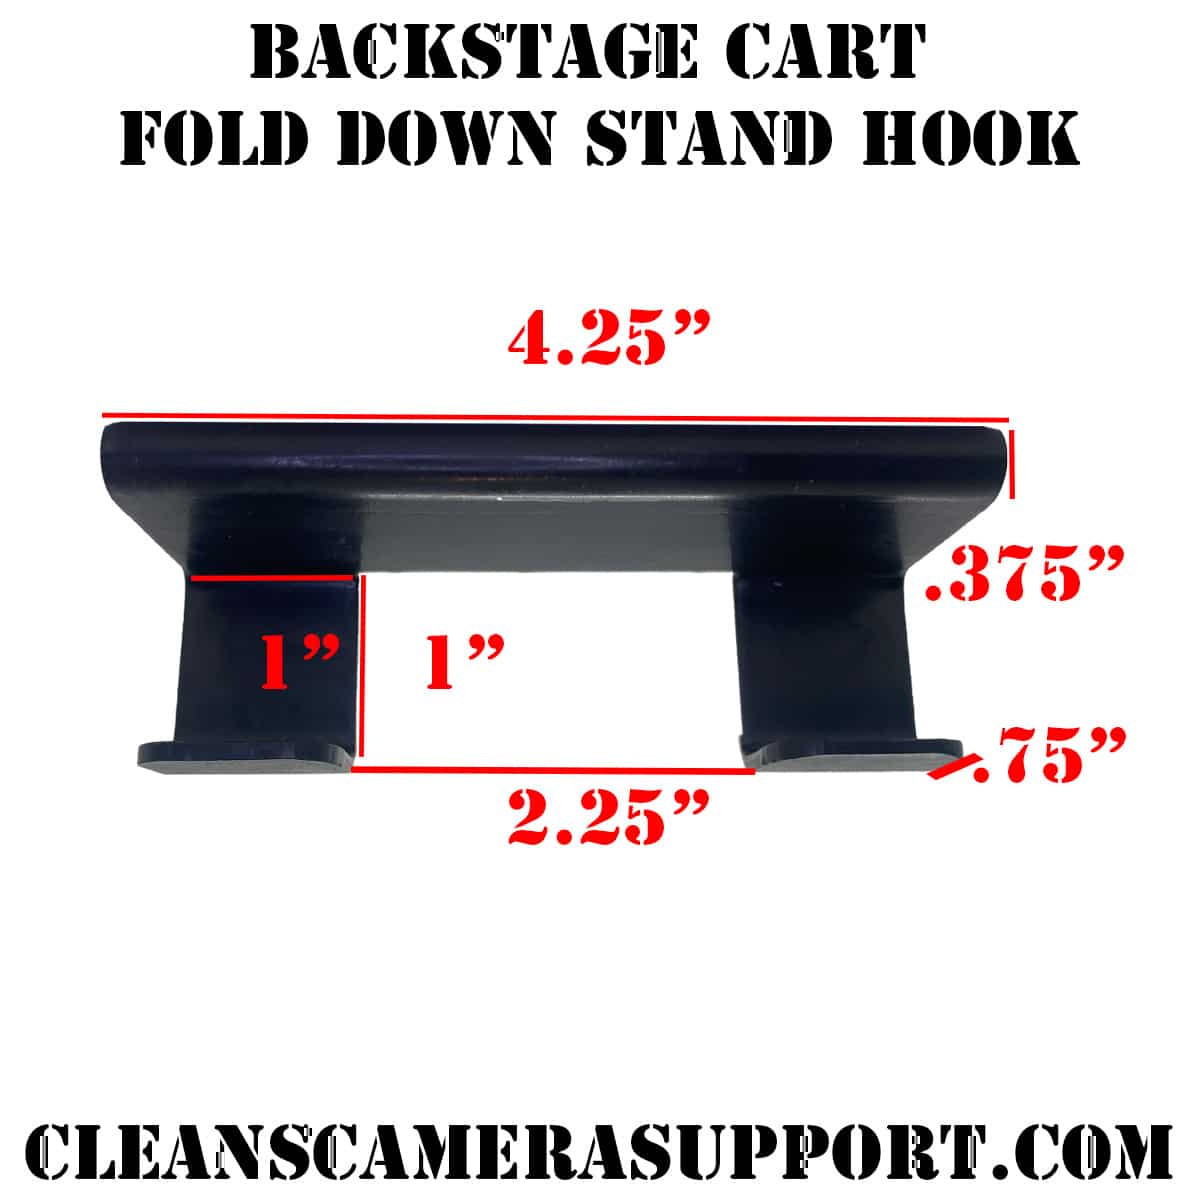 backstage fold down stand hook